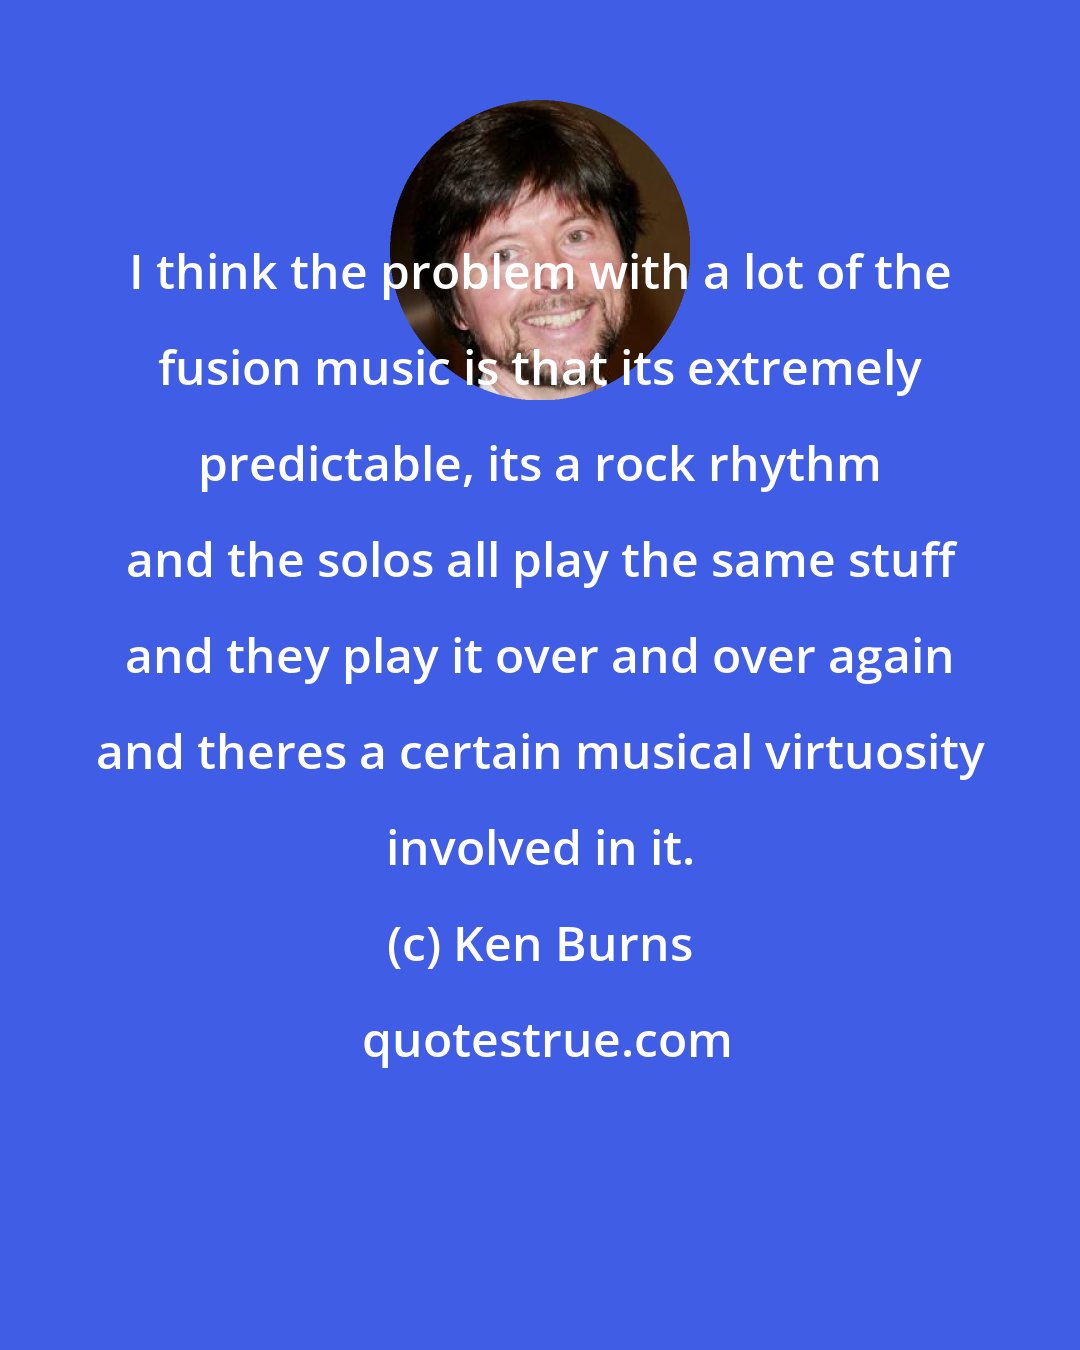 Ken Burns: I think the problem with a lot of the fusion music is that its extremely predictable, its a rock rhythm and the solos all play the same stuff and they play it over and over again and theres a certain musical virtuosity involved in it.